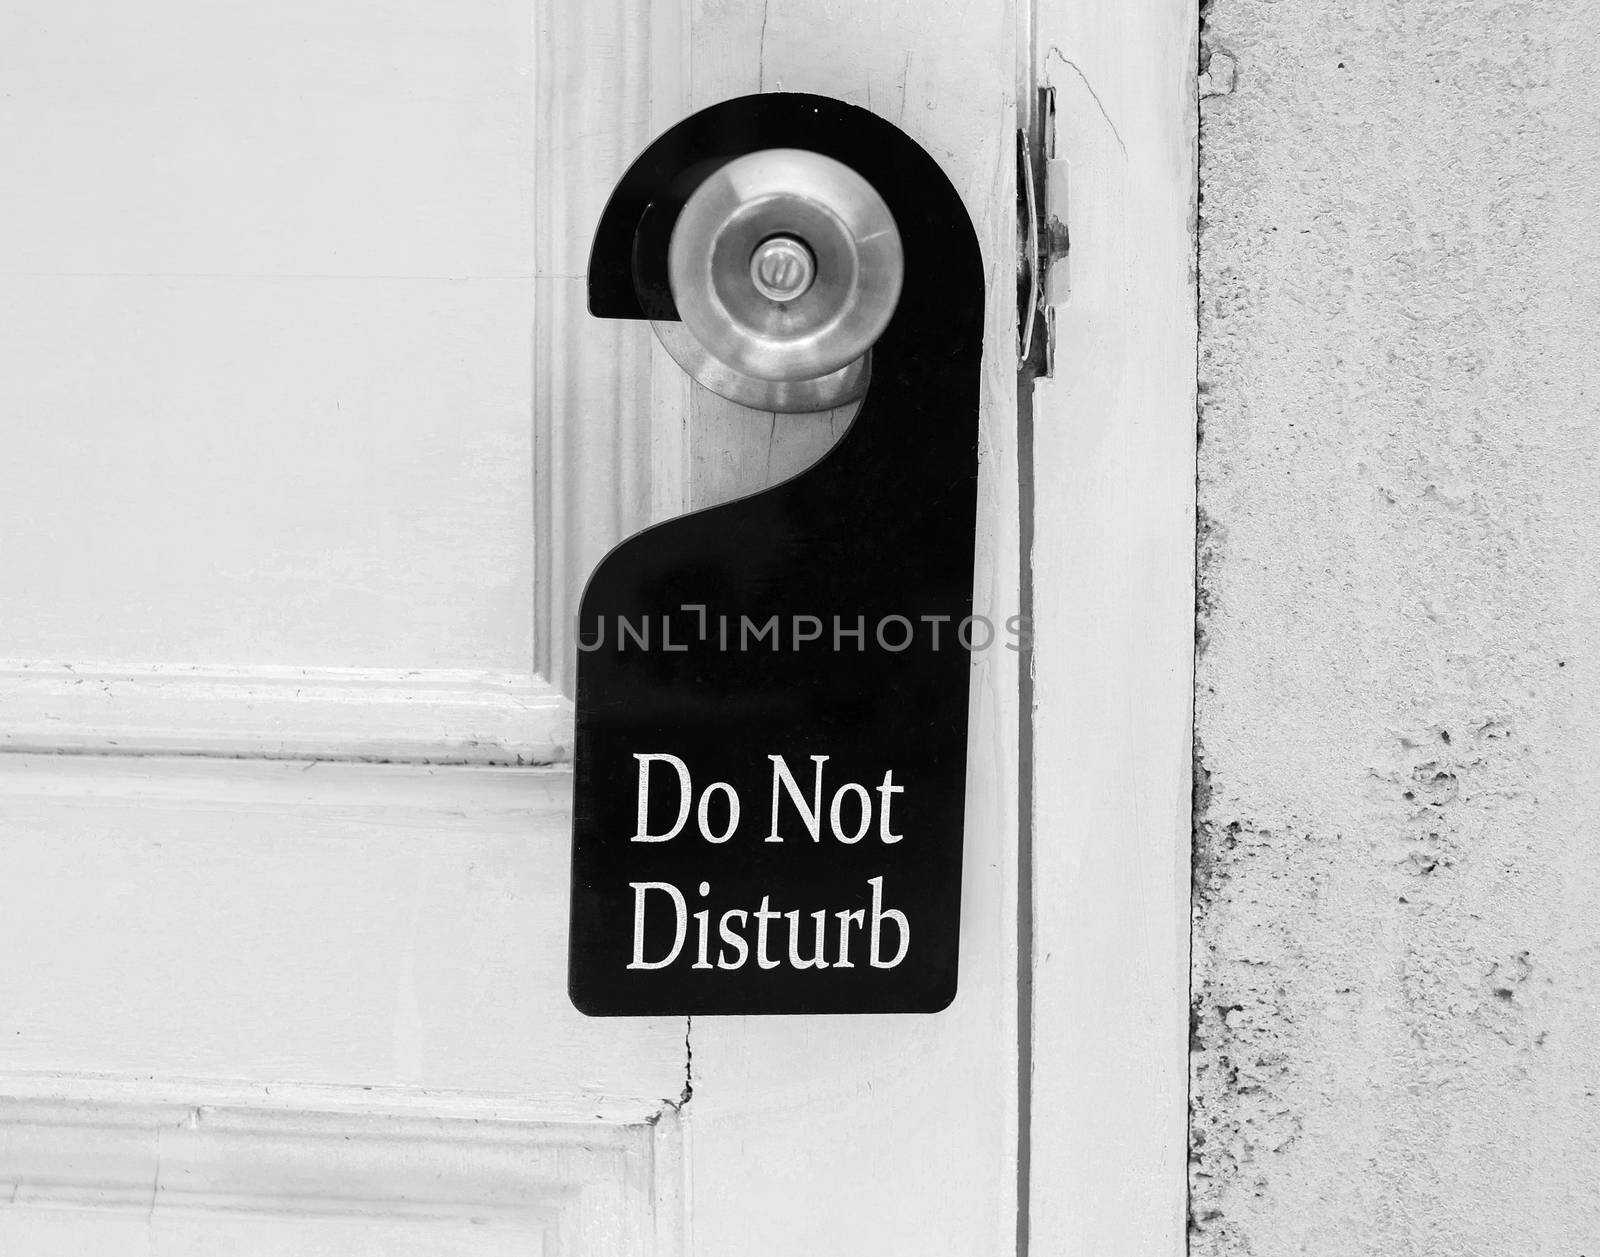 Do not disturb sign hang on door knob and stone wall.